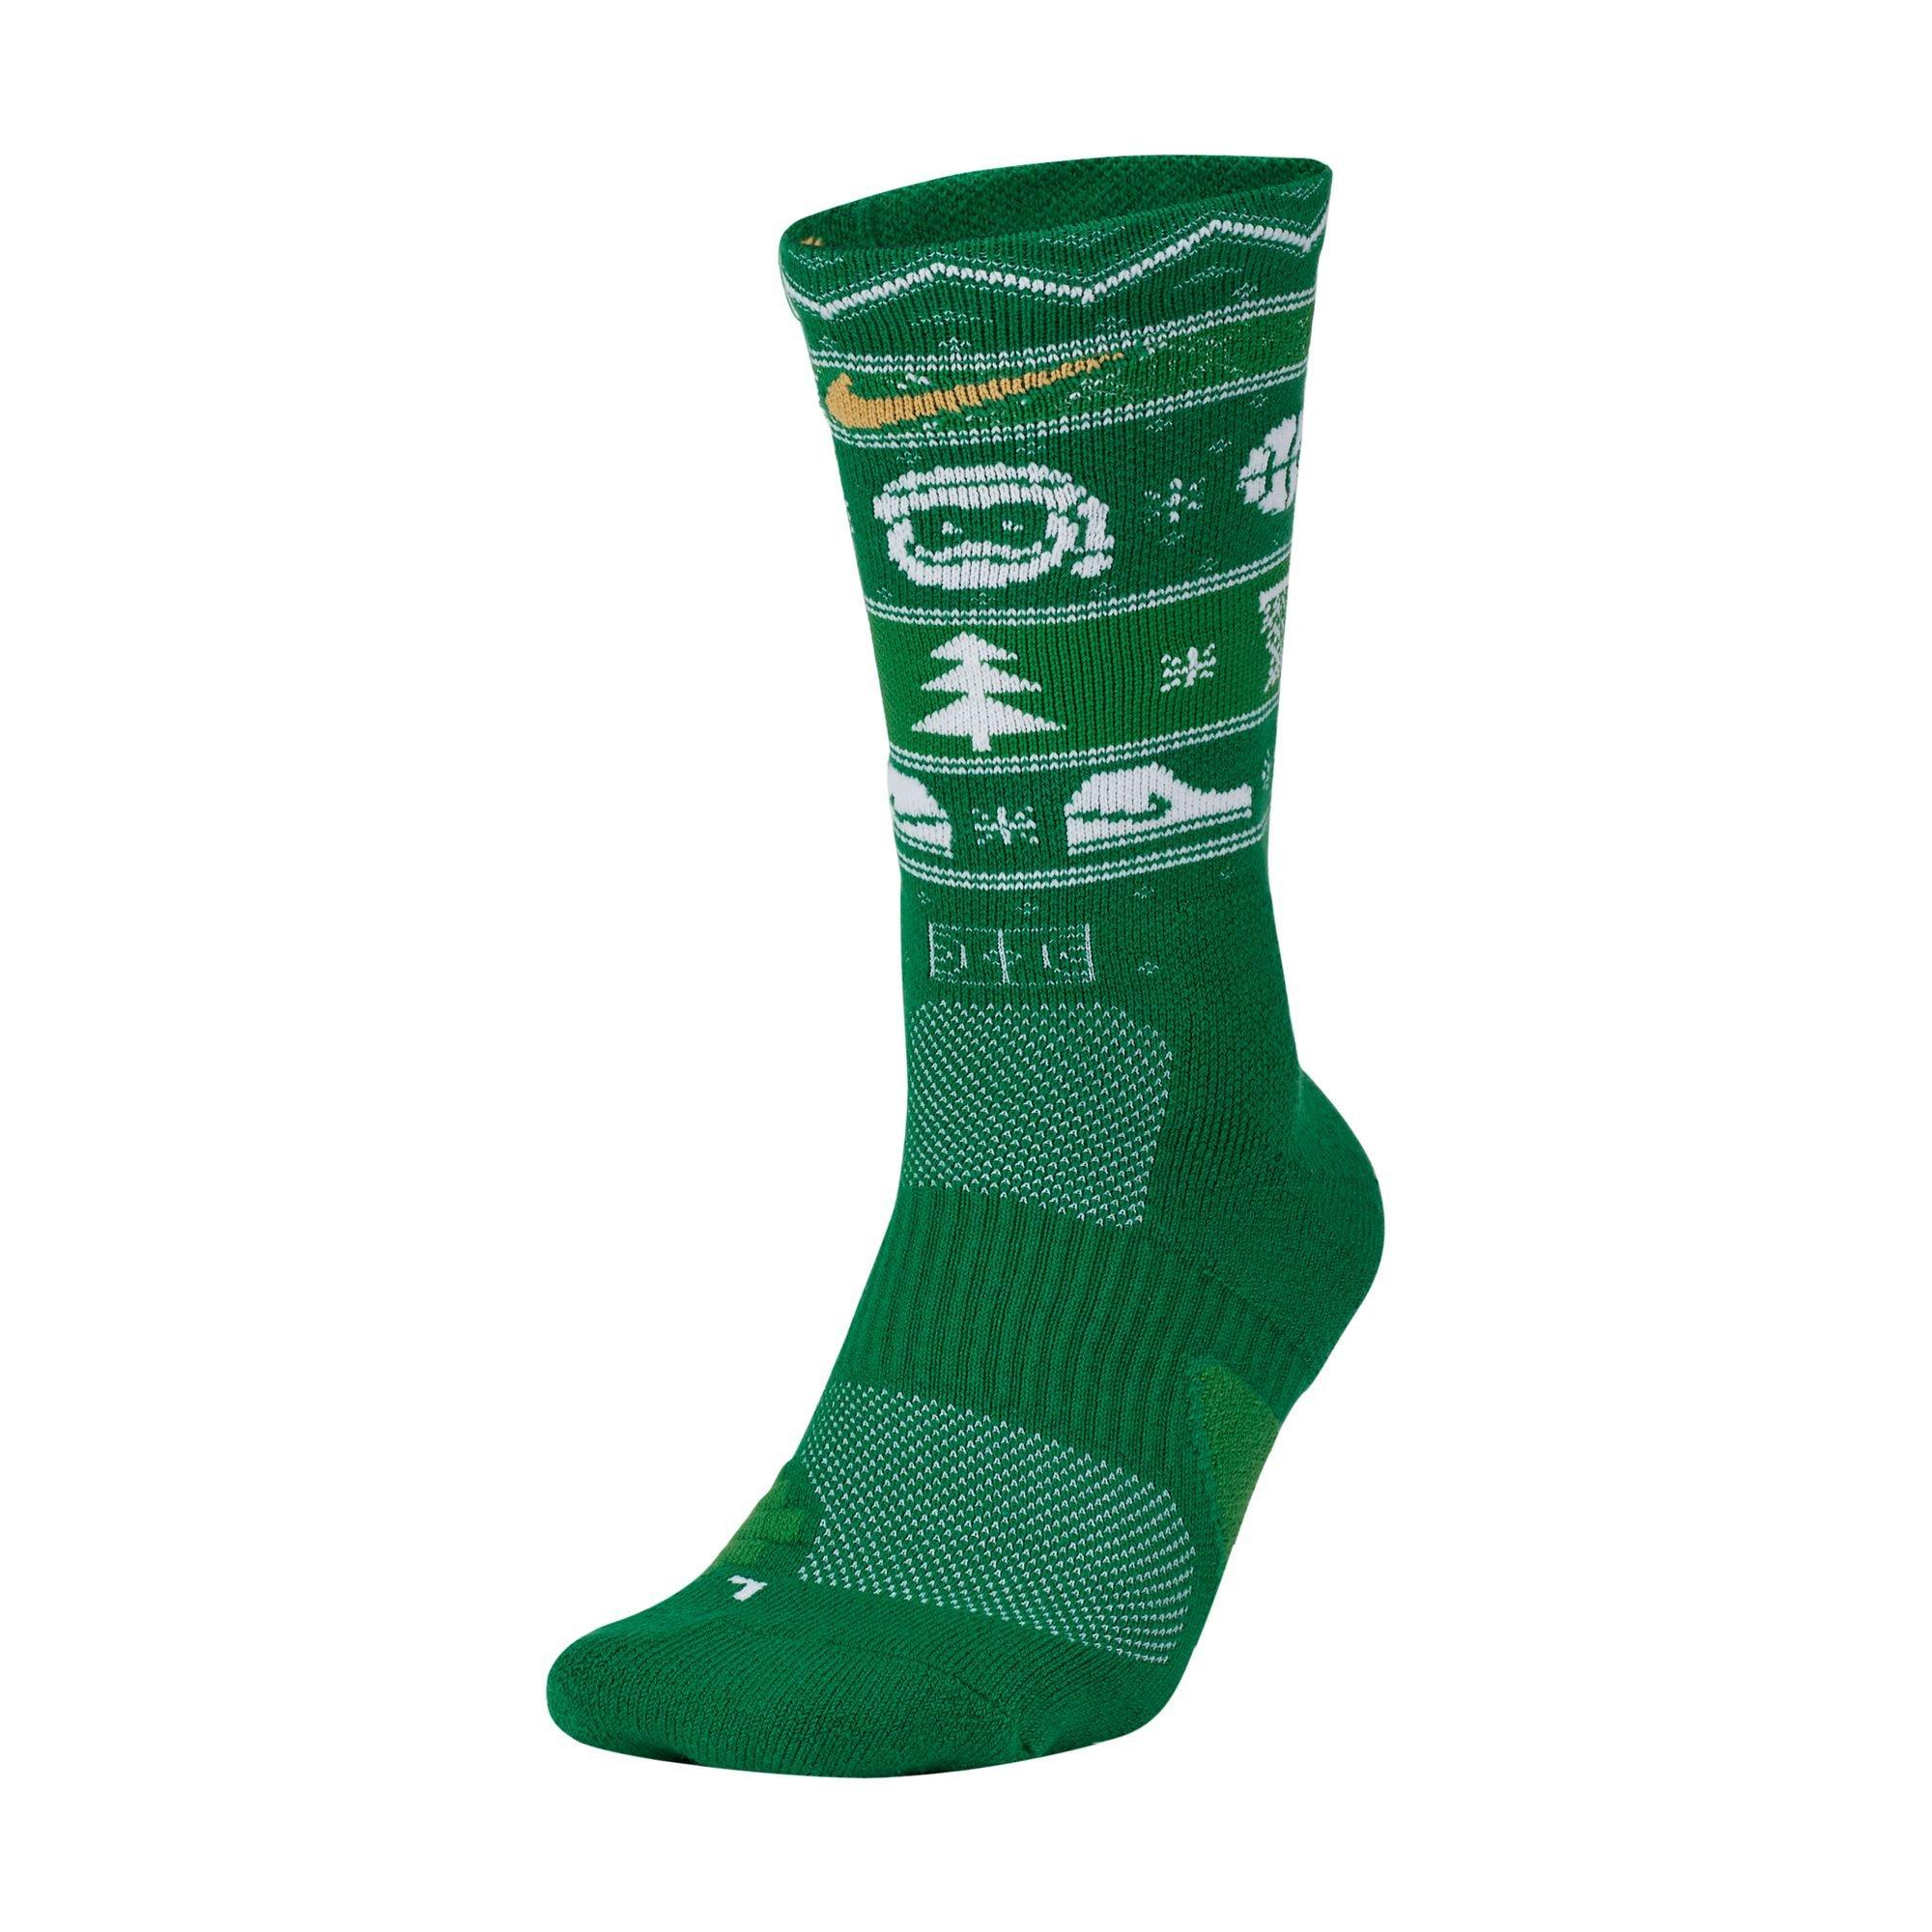 High Quality Breathable 100% Cotton Green Sports Socks For Men And Women  Available Perfect For Jogging, Basketball, Football And School Cute Gift  Box Included Style L5 From Clothing1713, $12.95